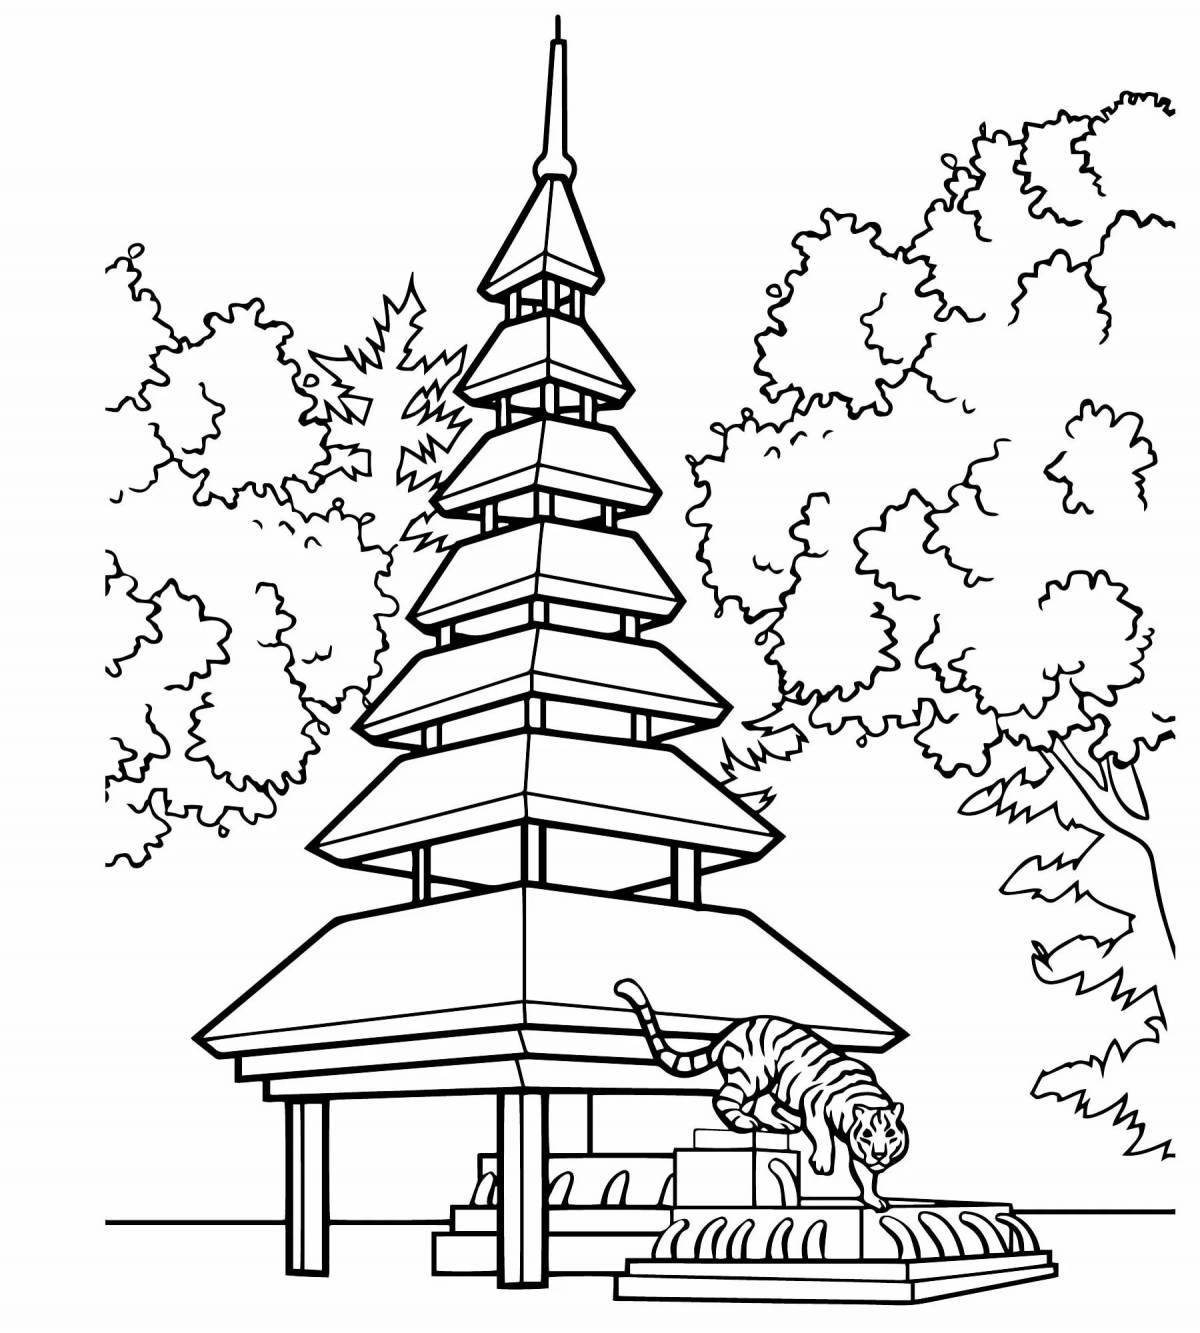 Amazing Chinese coloring book for kids